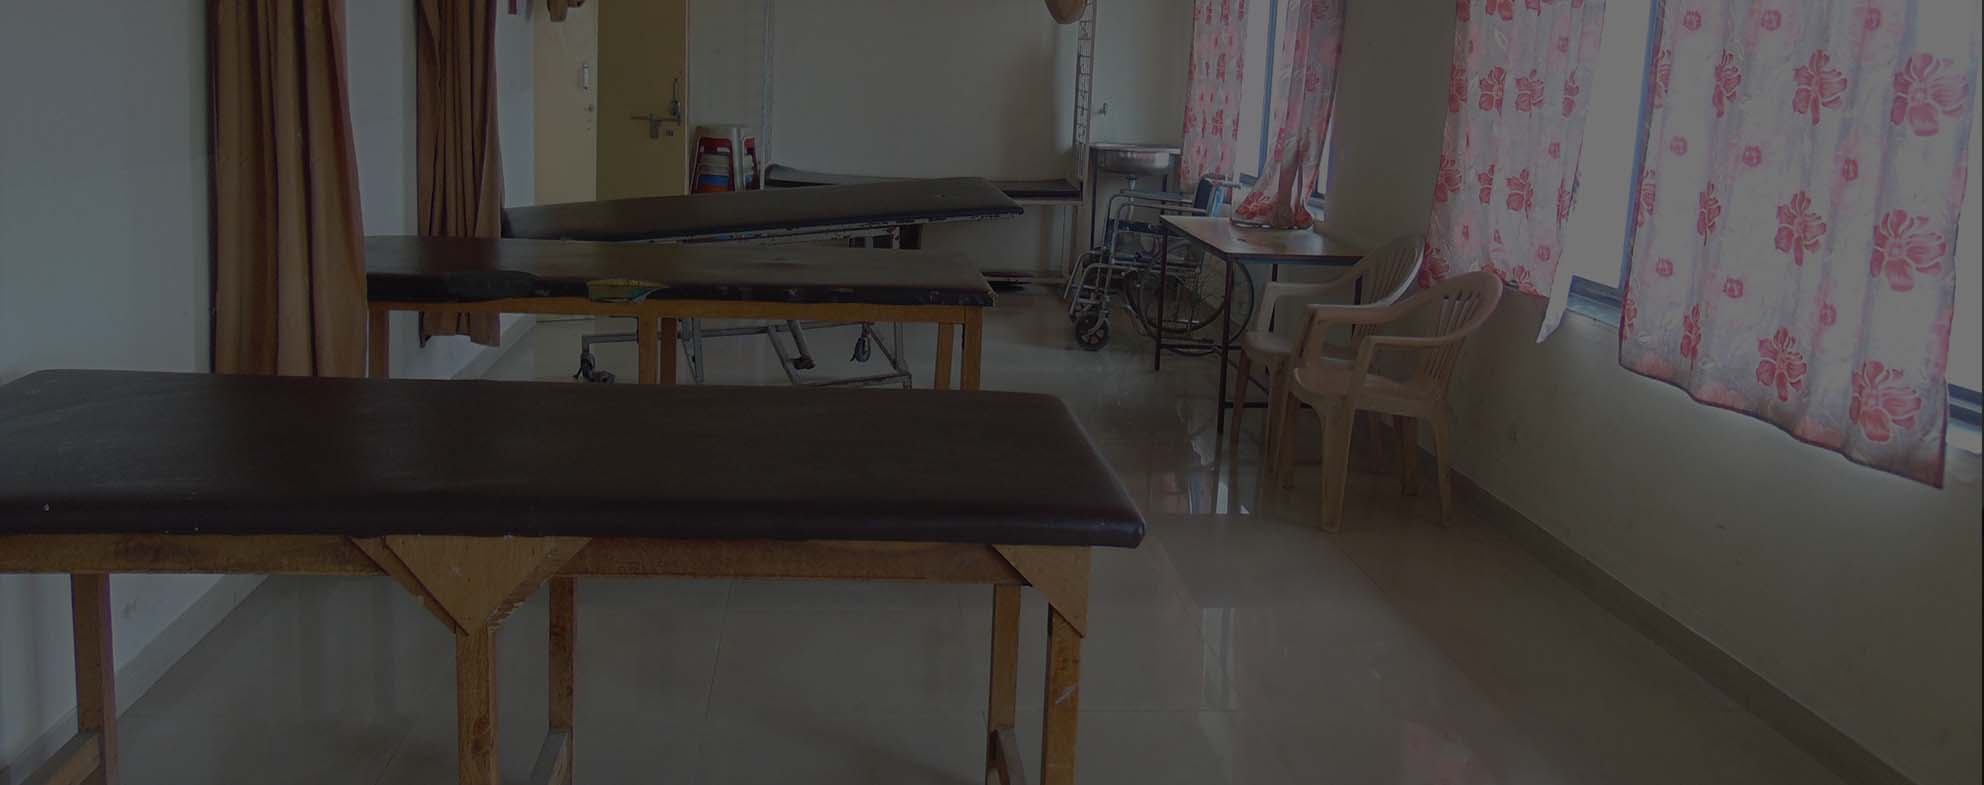 College of Physiotherapy